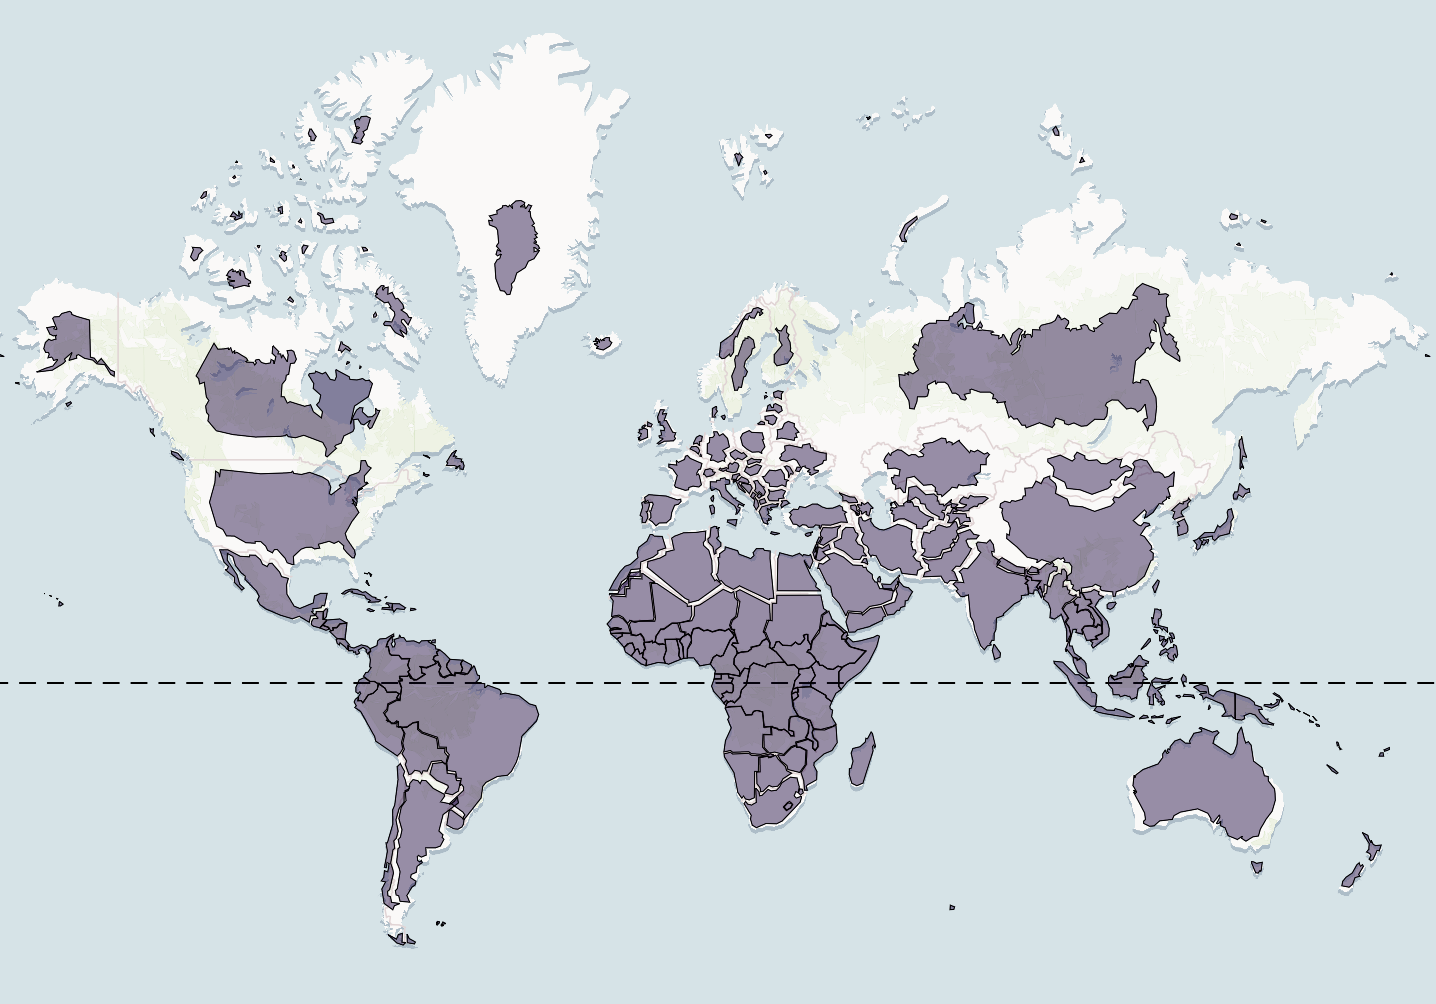 True size of countries is a free map website that shows the true size of each country on the Mercator projection. The projection was created in 1569 a